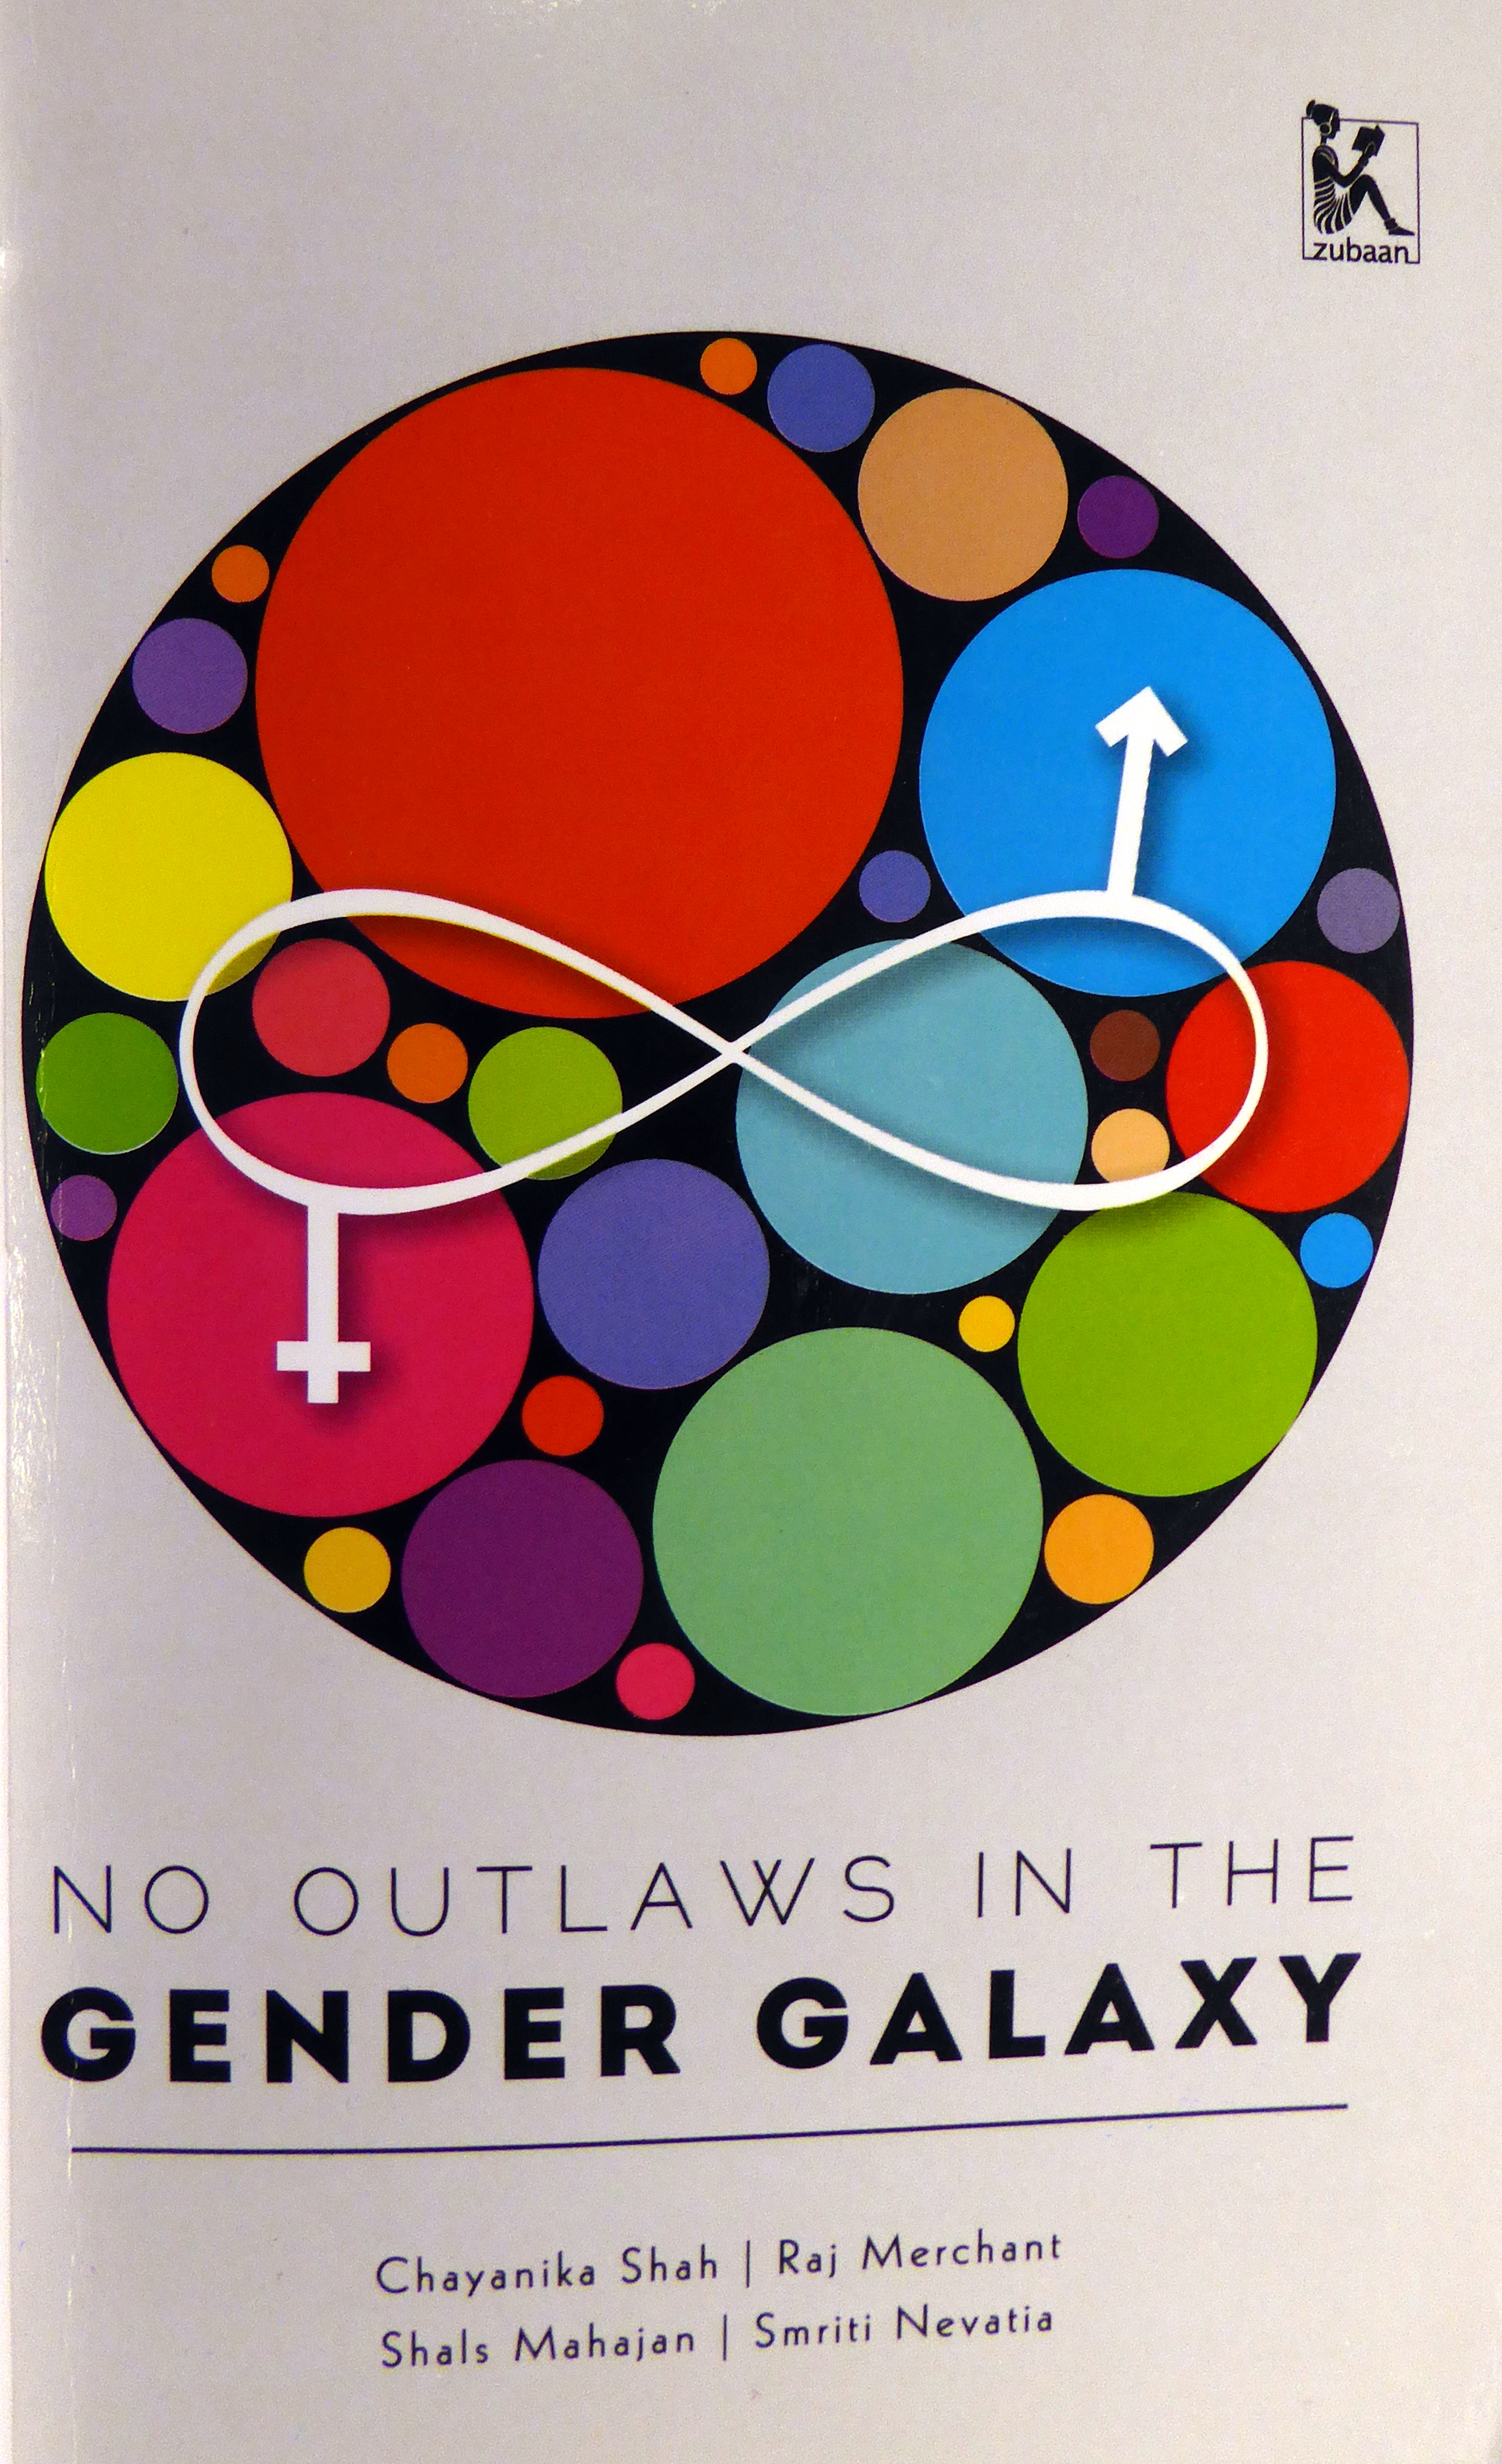 No outlaws in the gender galaxy